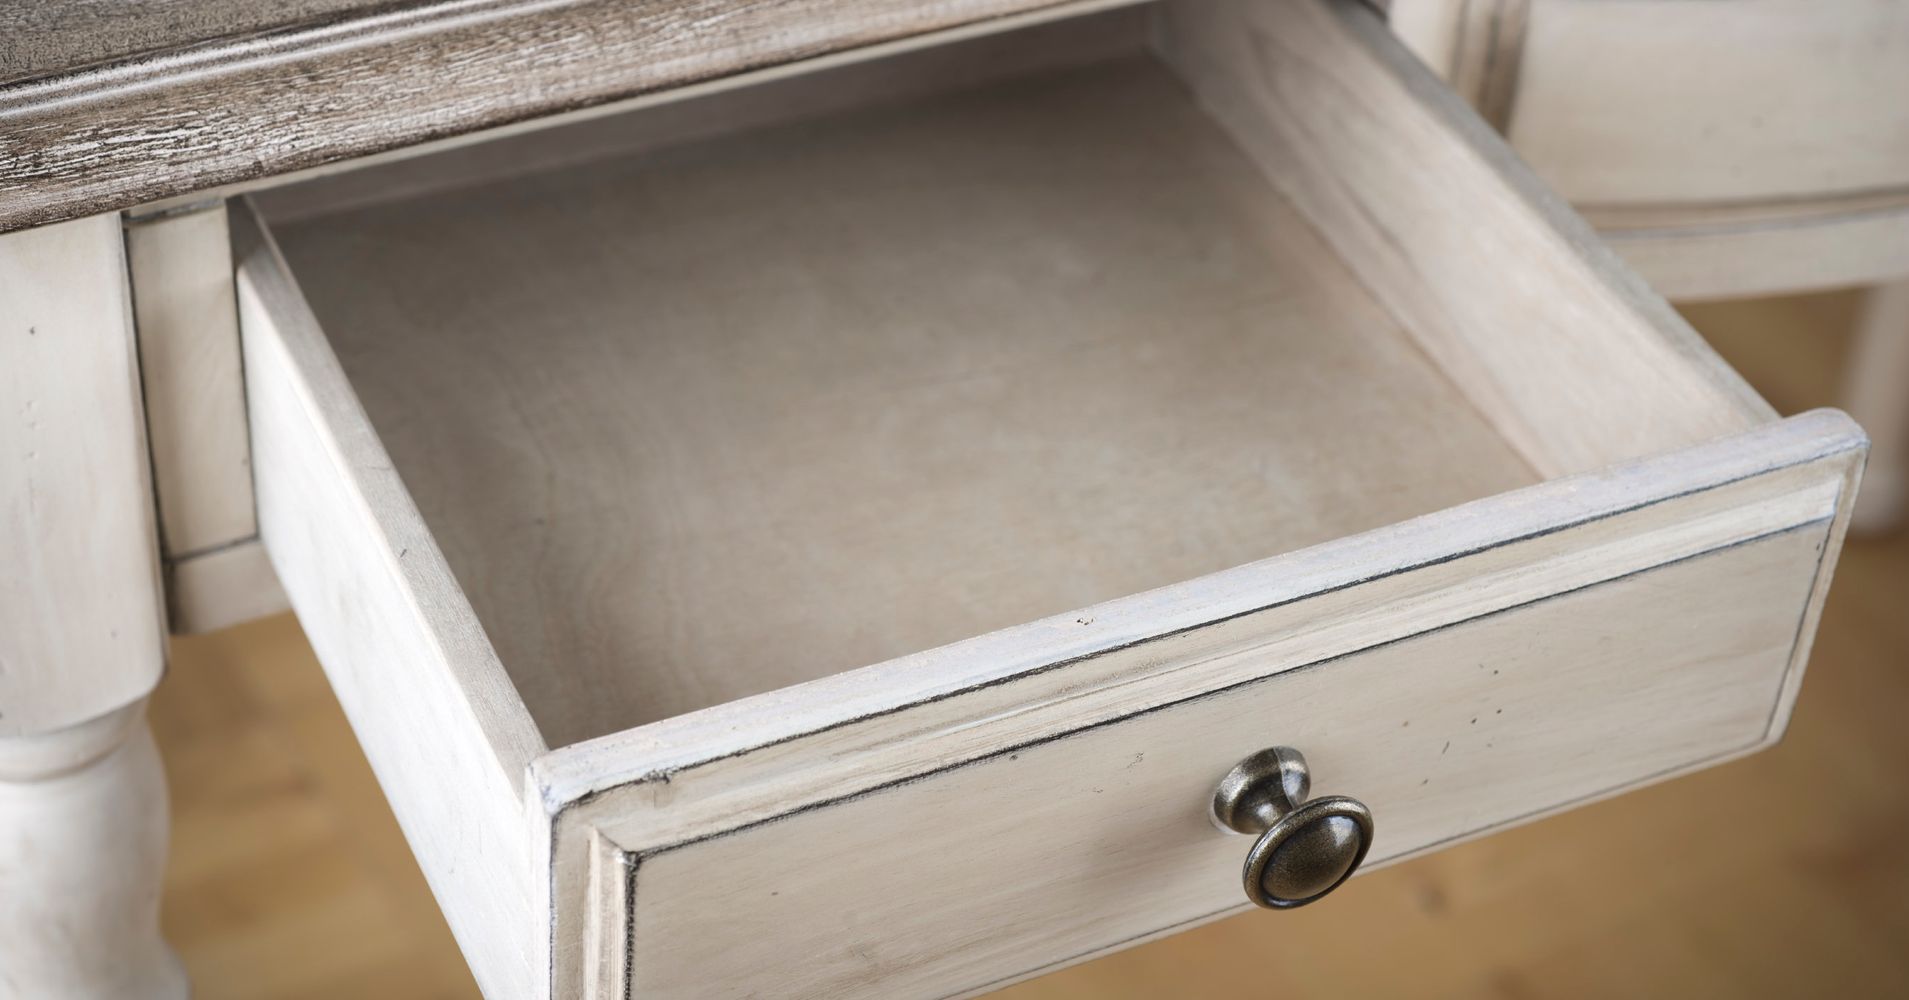 The Trick To Making Sure Old Drawers Never Get Stuck Again HuffPost